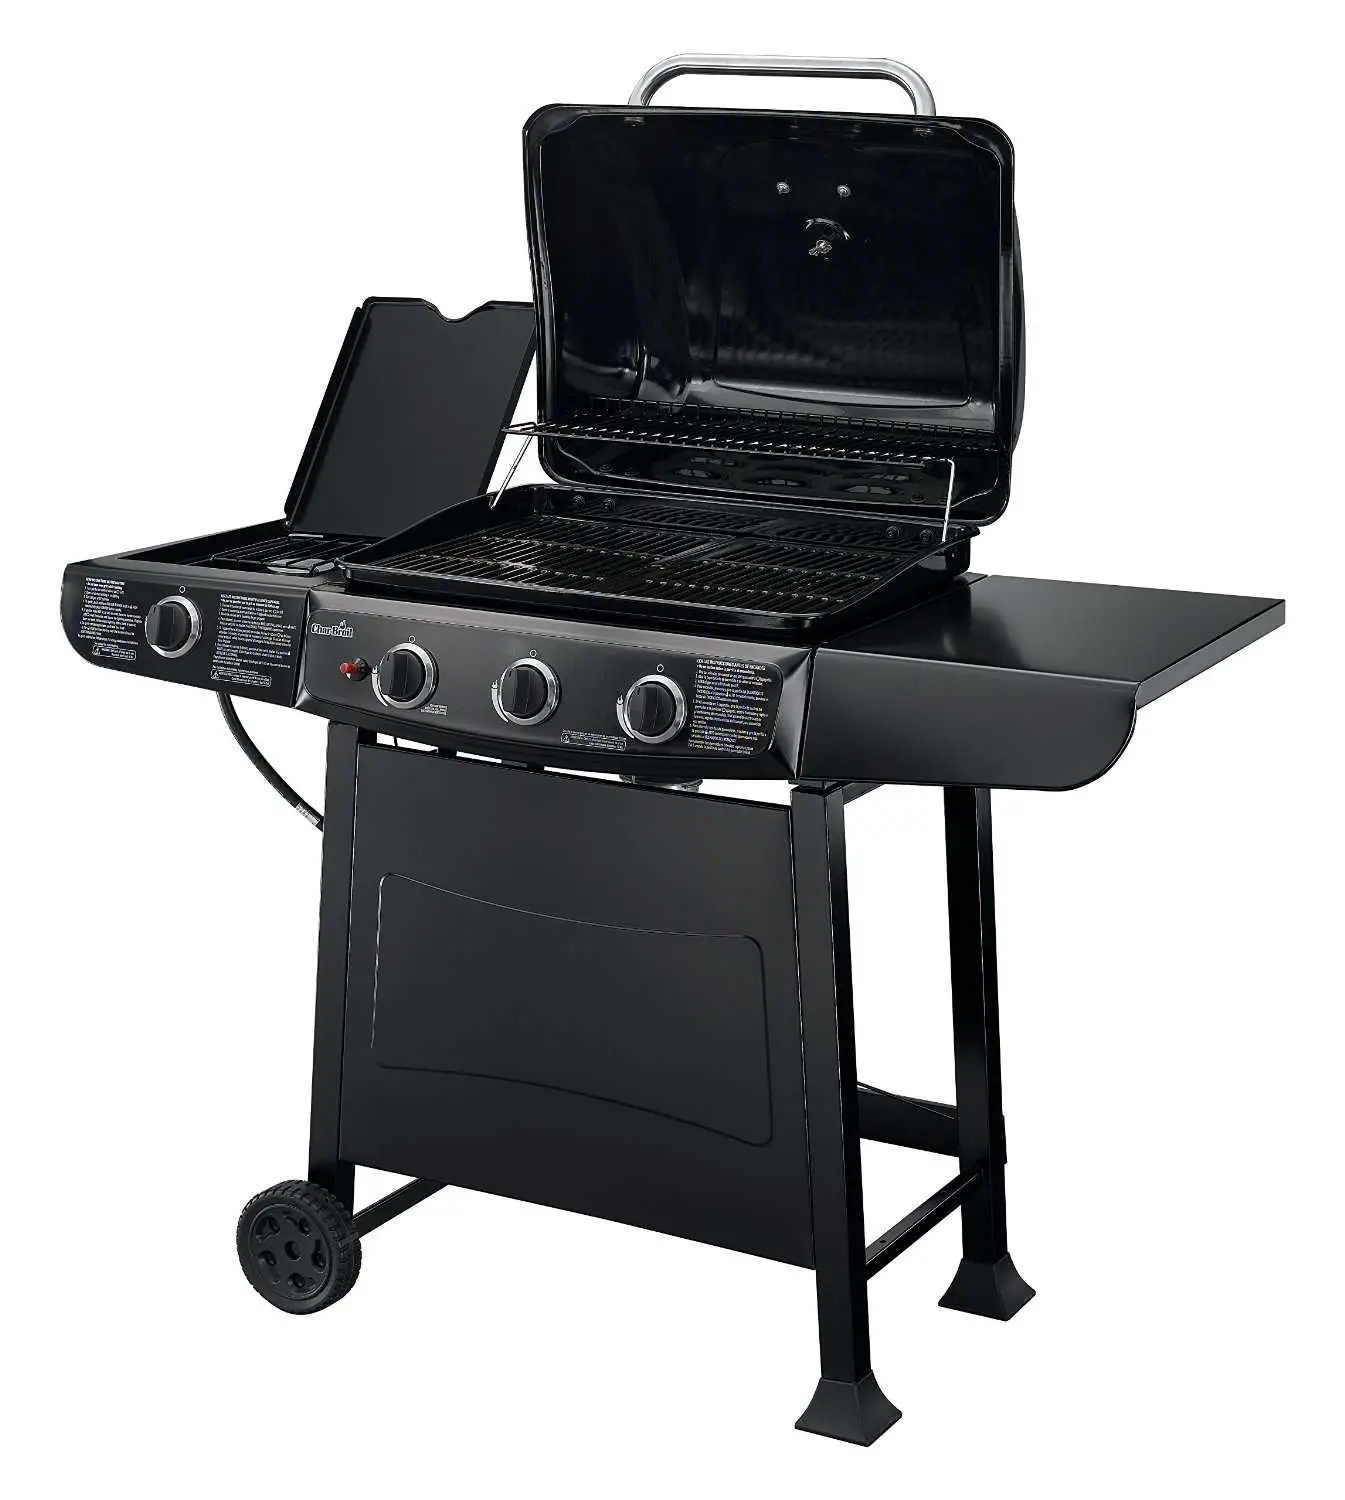 Best 3 Burner Gas Grill Reviews In 2020